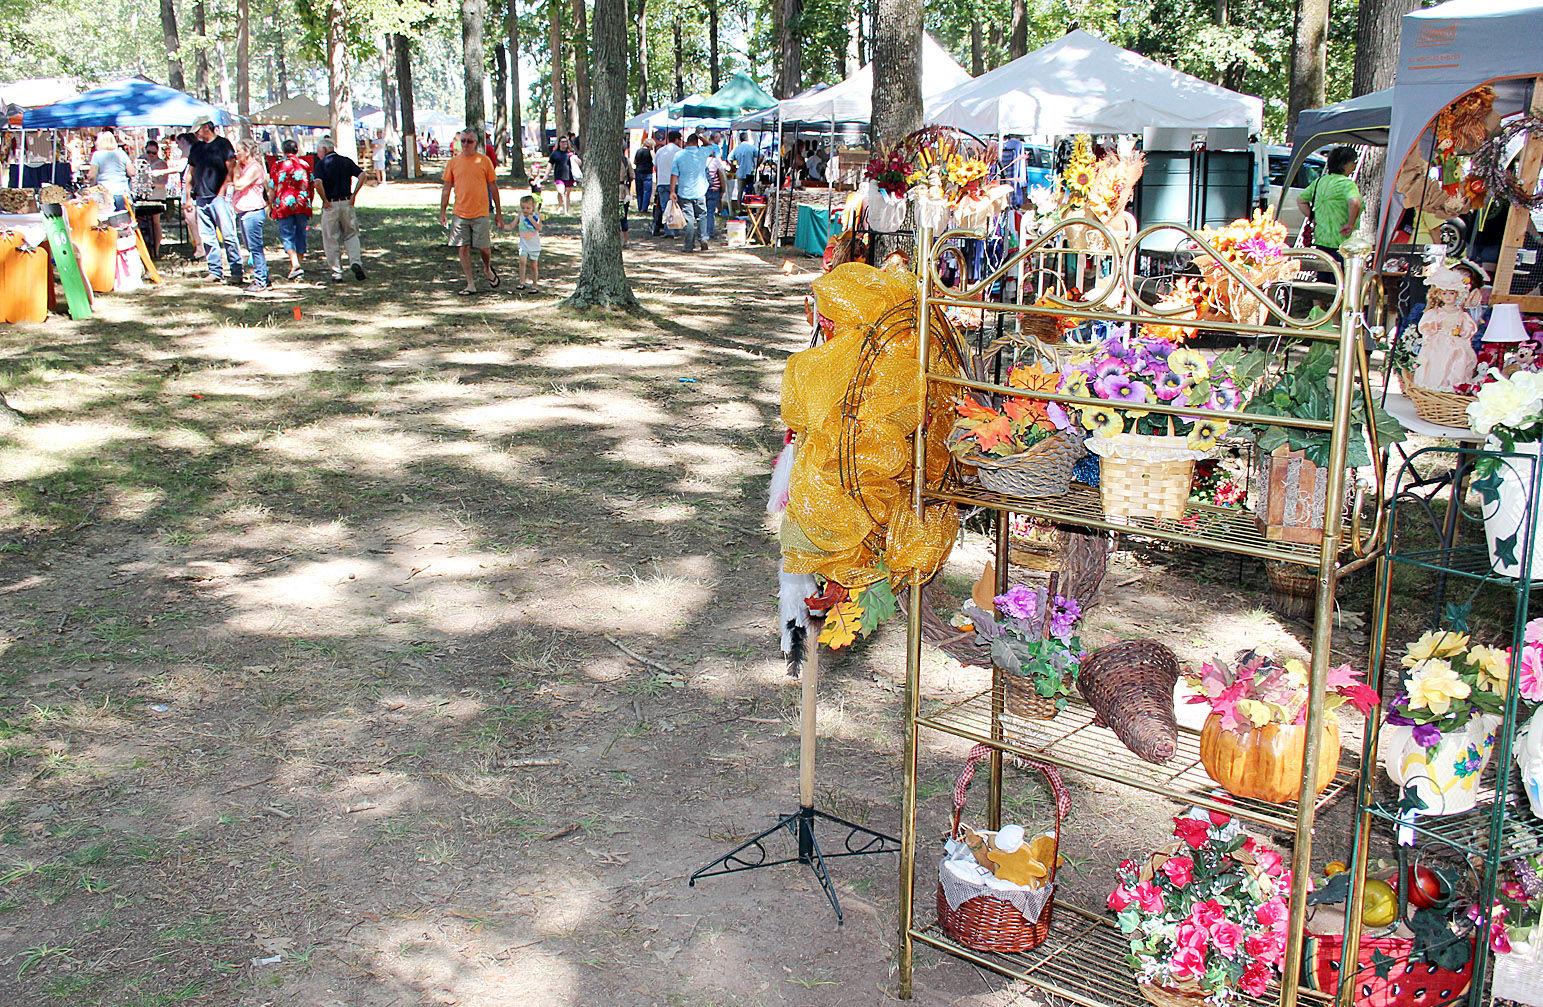 Arts, crafts festival is this week at lake Local News